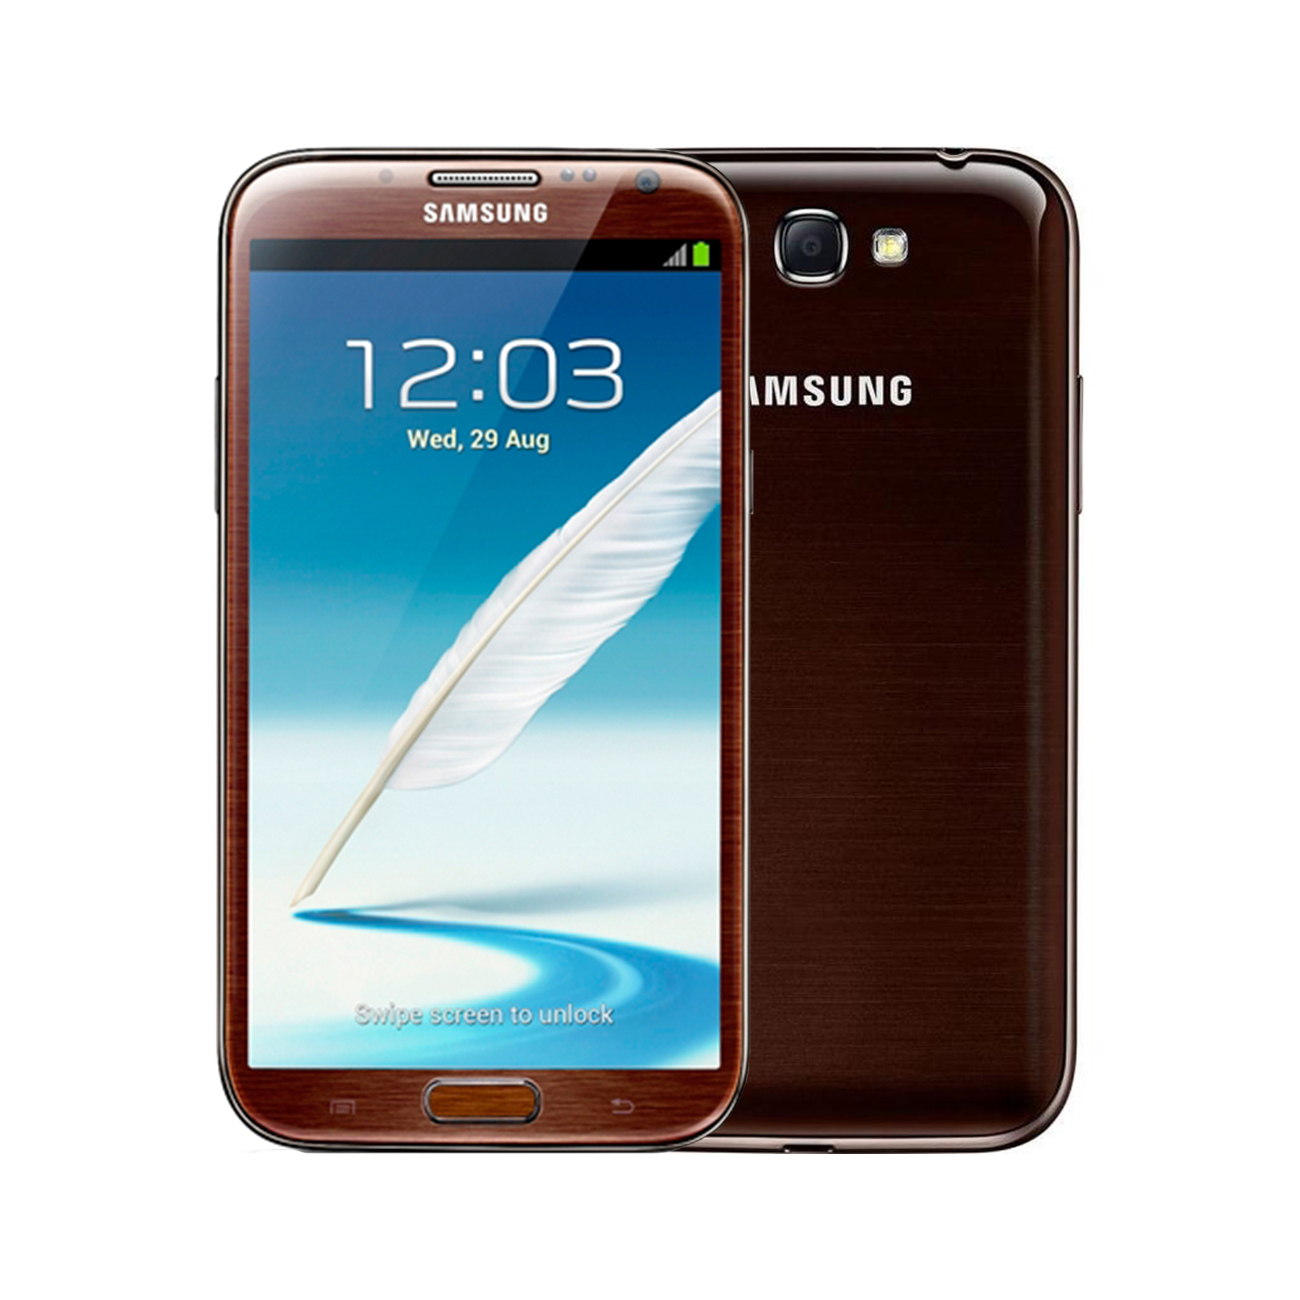 Samsung Galaxy Note 2 [16GB] [Amber Brown] [Imperfect]